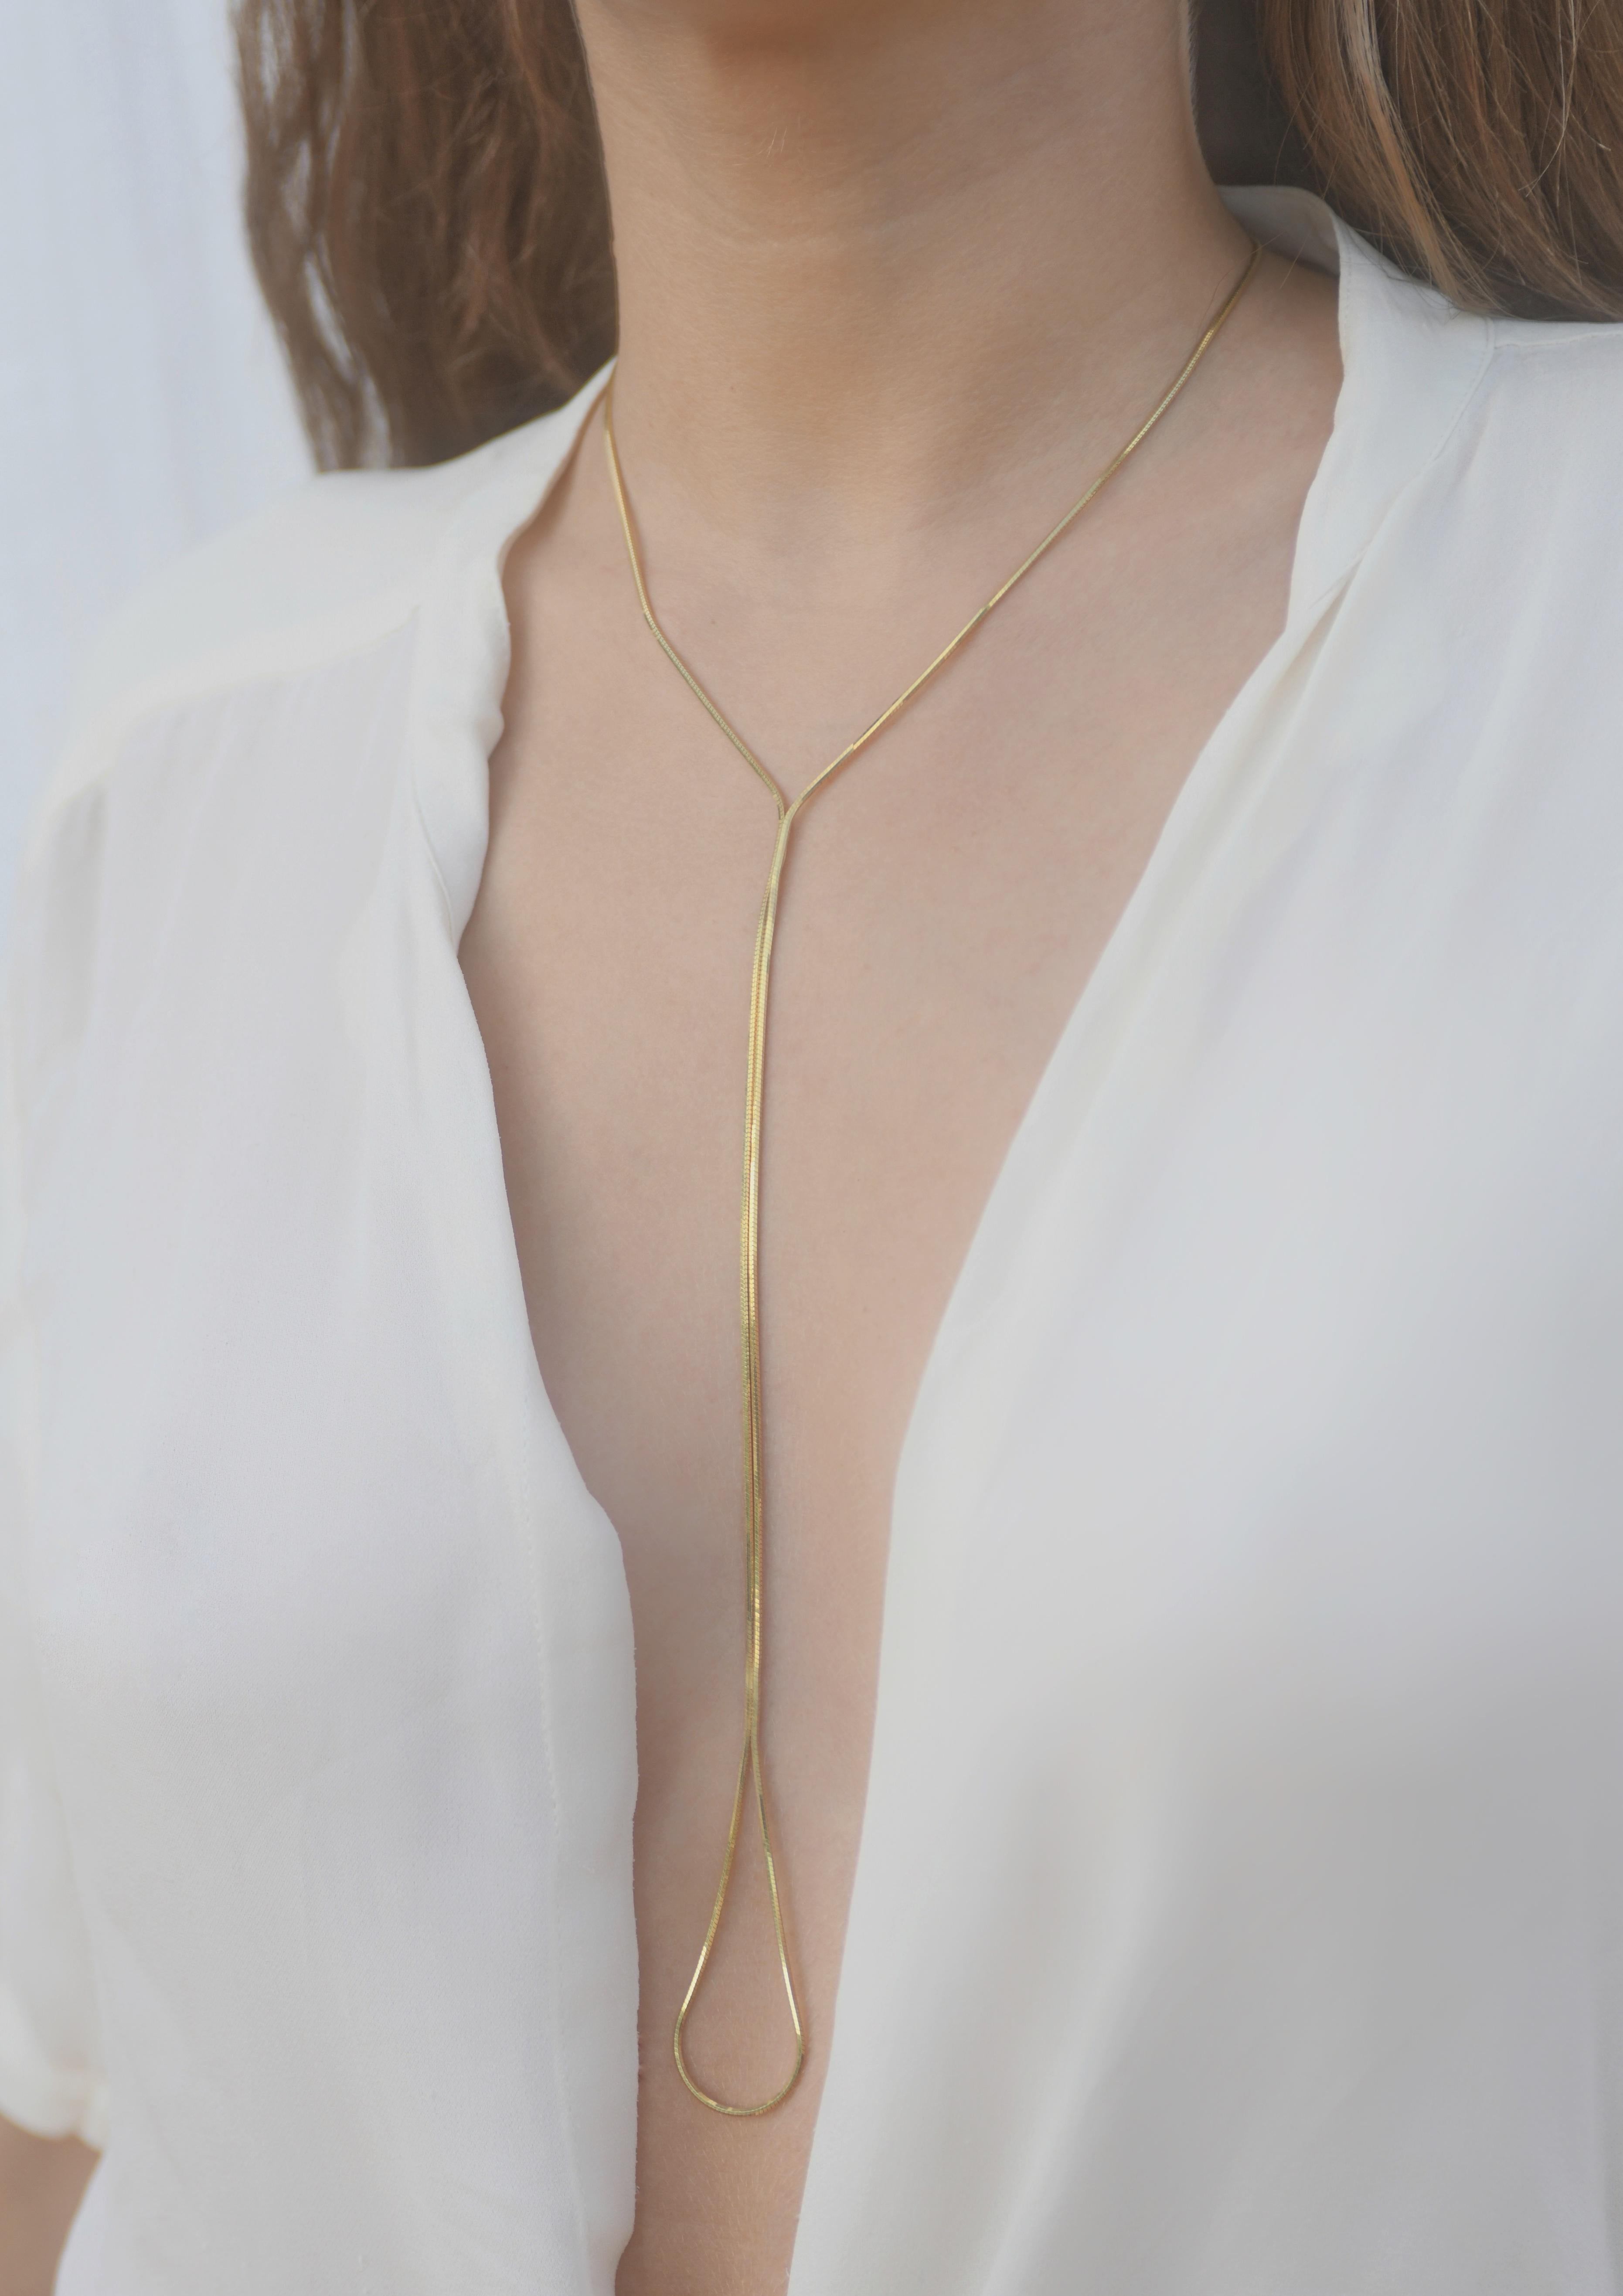 Playland  Lariat 

Created to compliment and caress a woman's neckline. Through the use of the snake chain, this gold plated silver lariat creates movement and adds an extra glow to your look. Hand-crafted by local skilled Greek craftsmen.

This